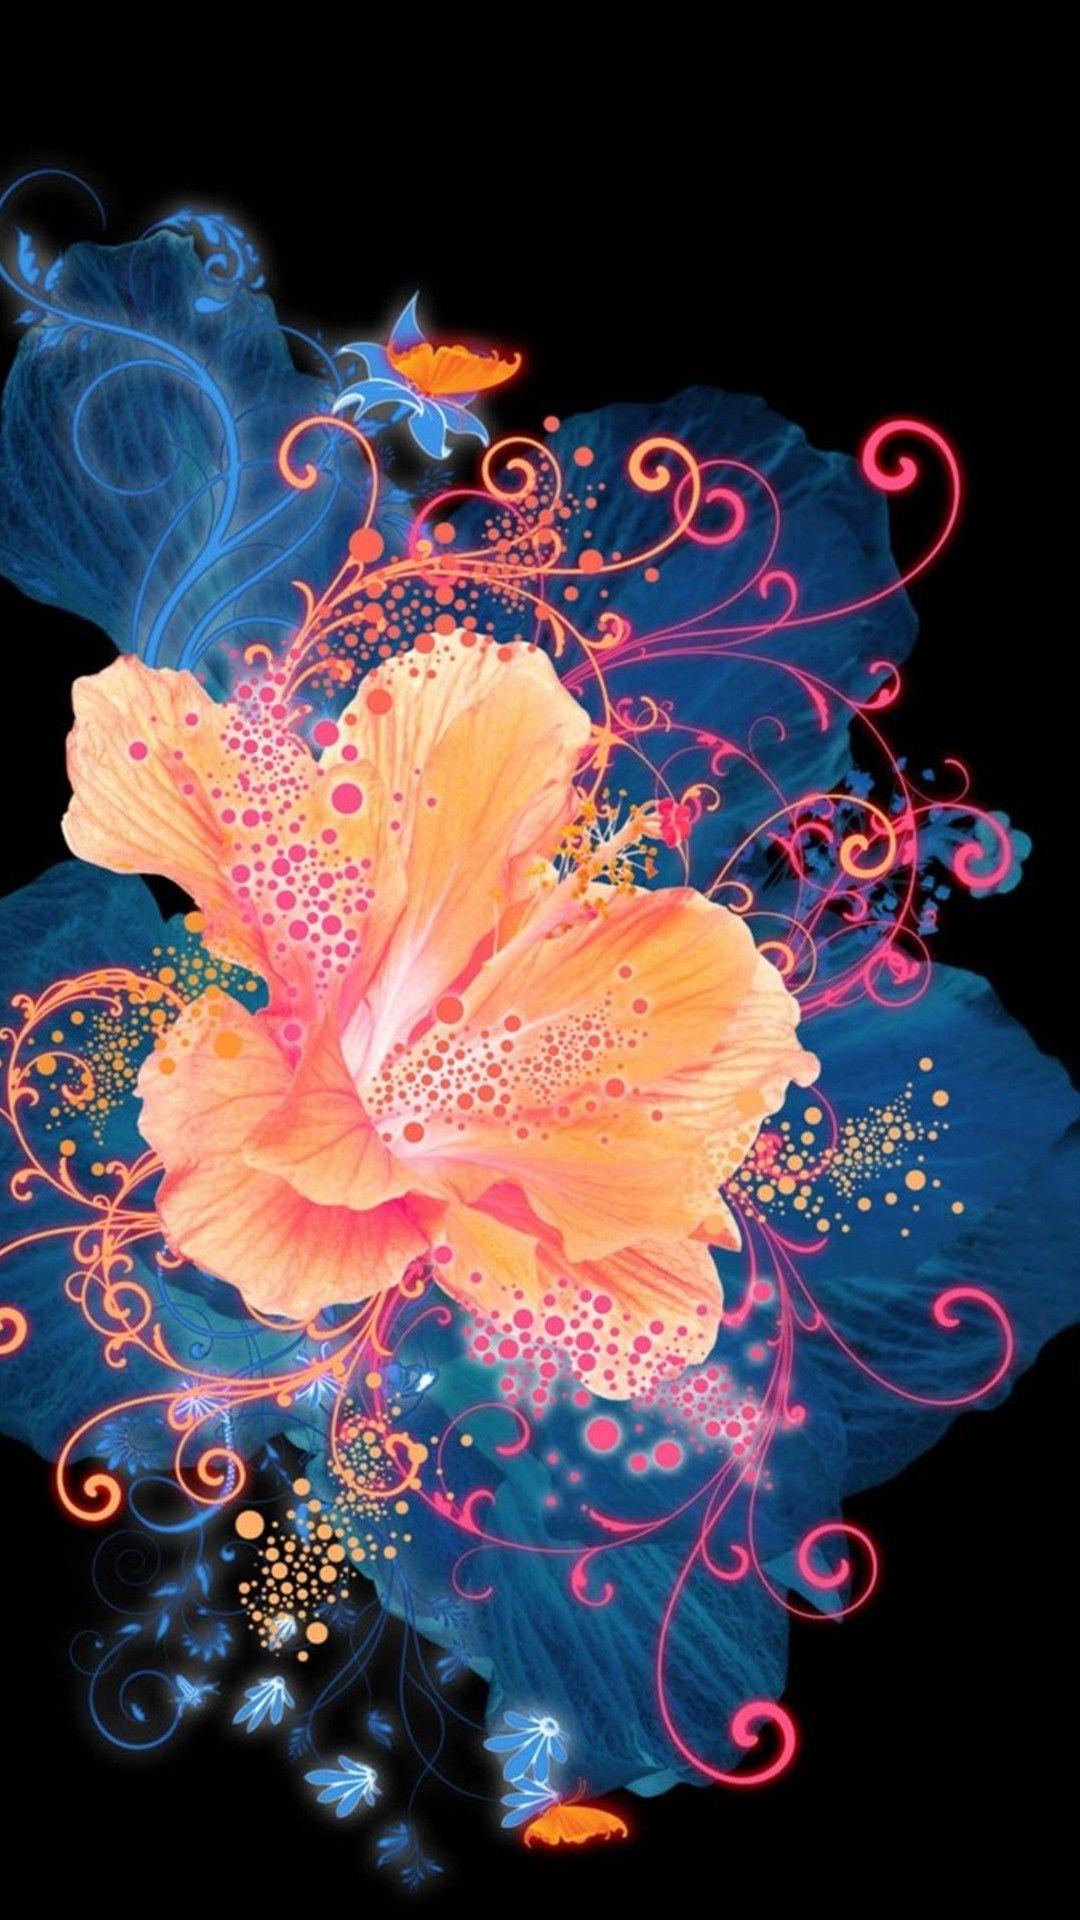 Abstract Flower Fractal Digital Art HD Artist 4k Wallpapers Images  Backgrounds Photos and Pictures